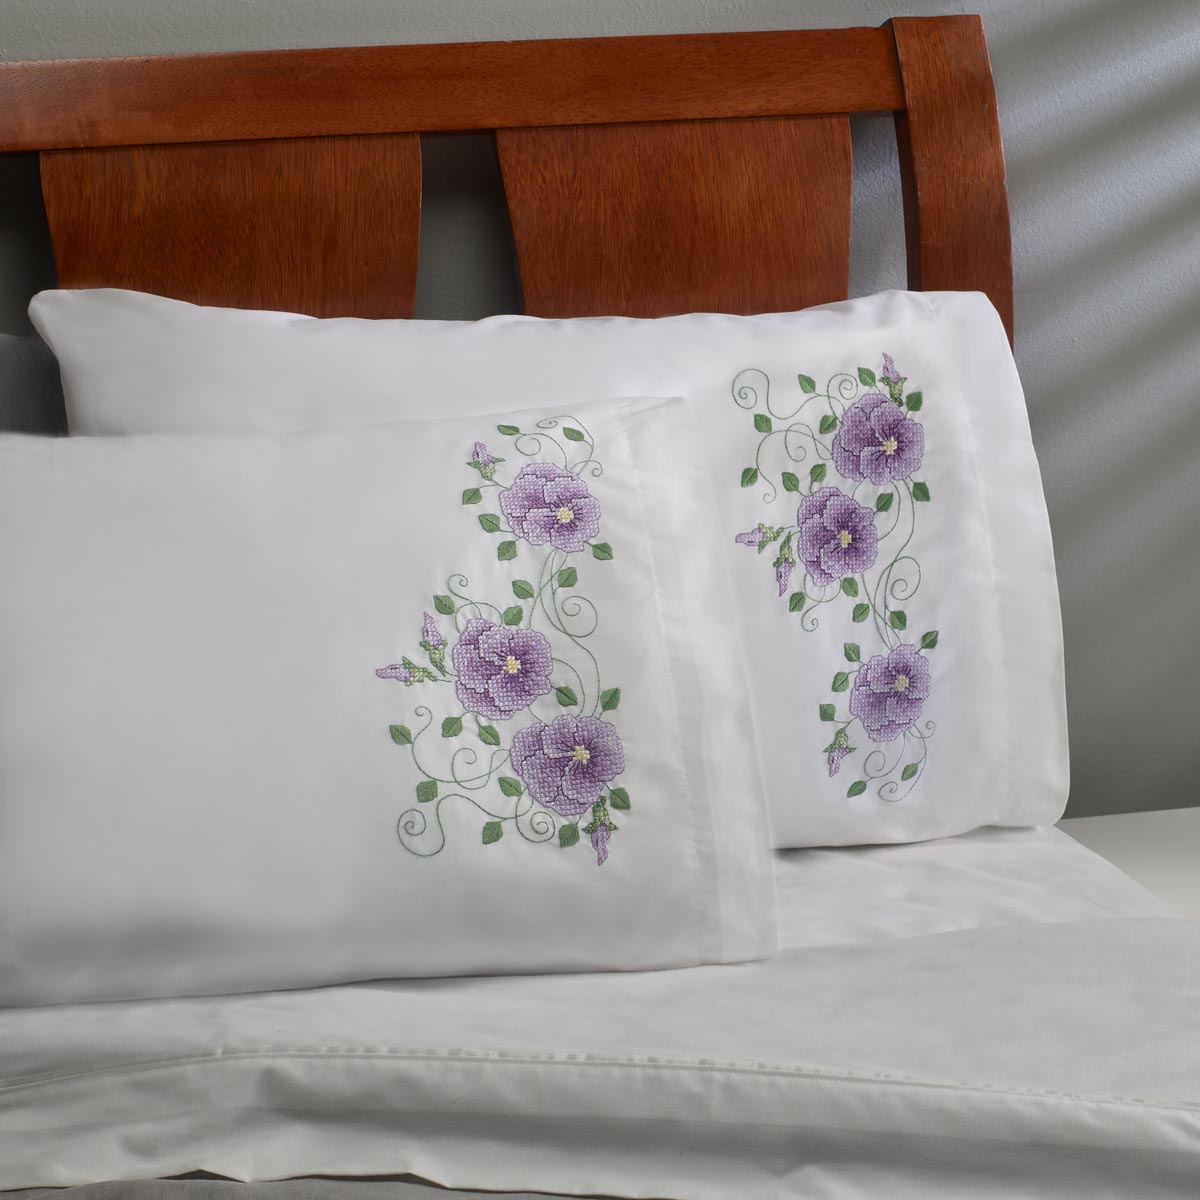 Bucilla ® Stamped Cross Stitch & Embroidery - Pillowcase Pairs - Violet Vines - 47933E